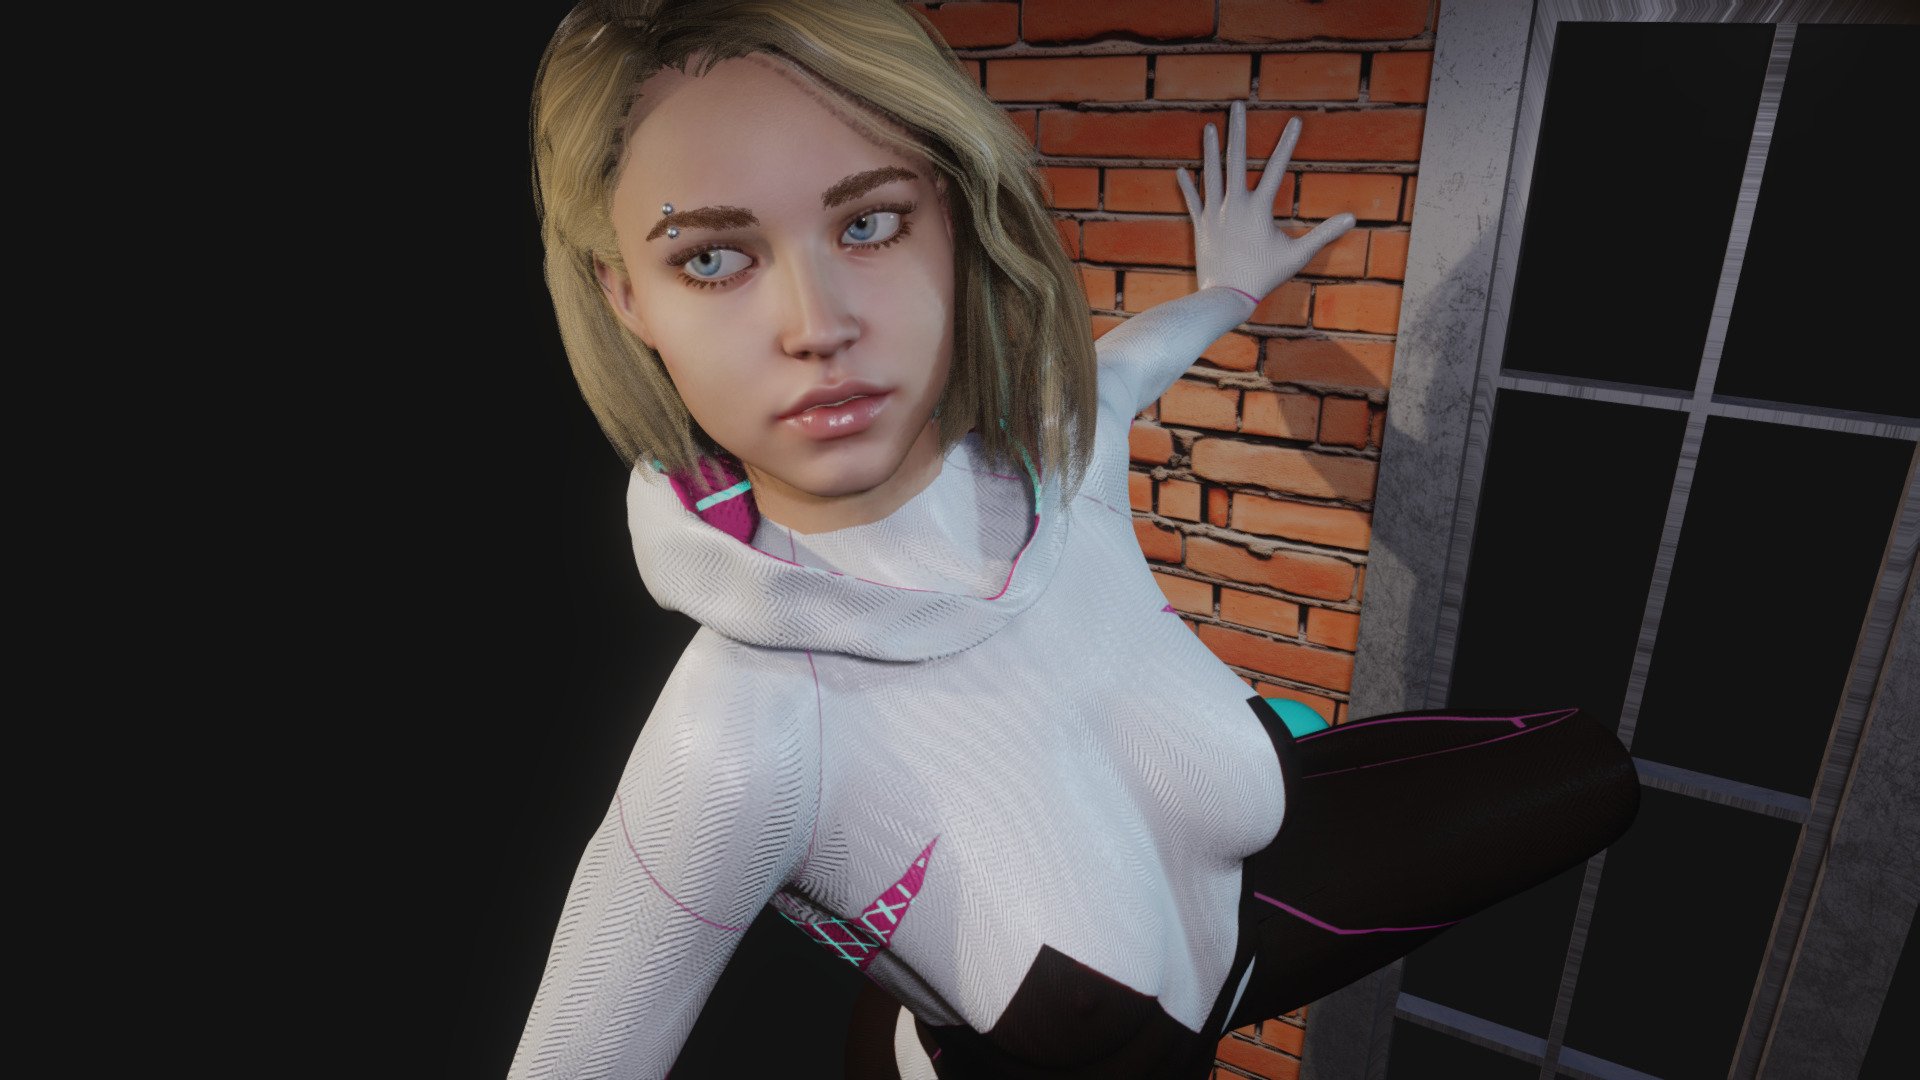 * PLEASE DOWNLOAD THE RAR INSIDE THE ADDITIONAL FILES!!!
Spider Gwen with mask. Model in Blender file. Fully rigged. SSS subsurface scattering. mixamo bone names for animation. includes 2 skin materials and 1 extra shapekey 3d model